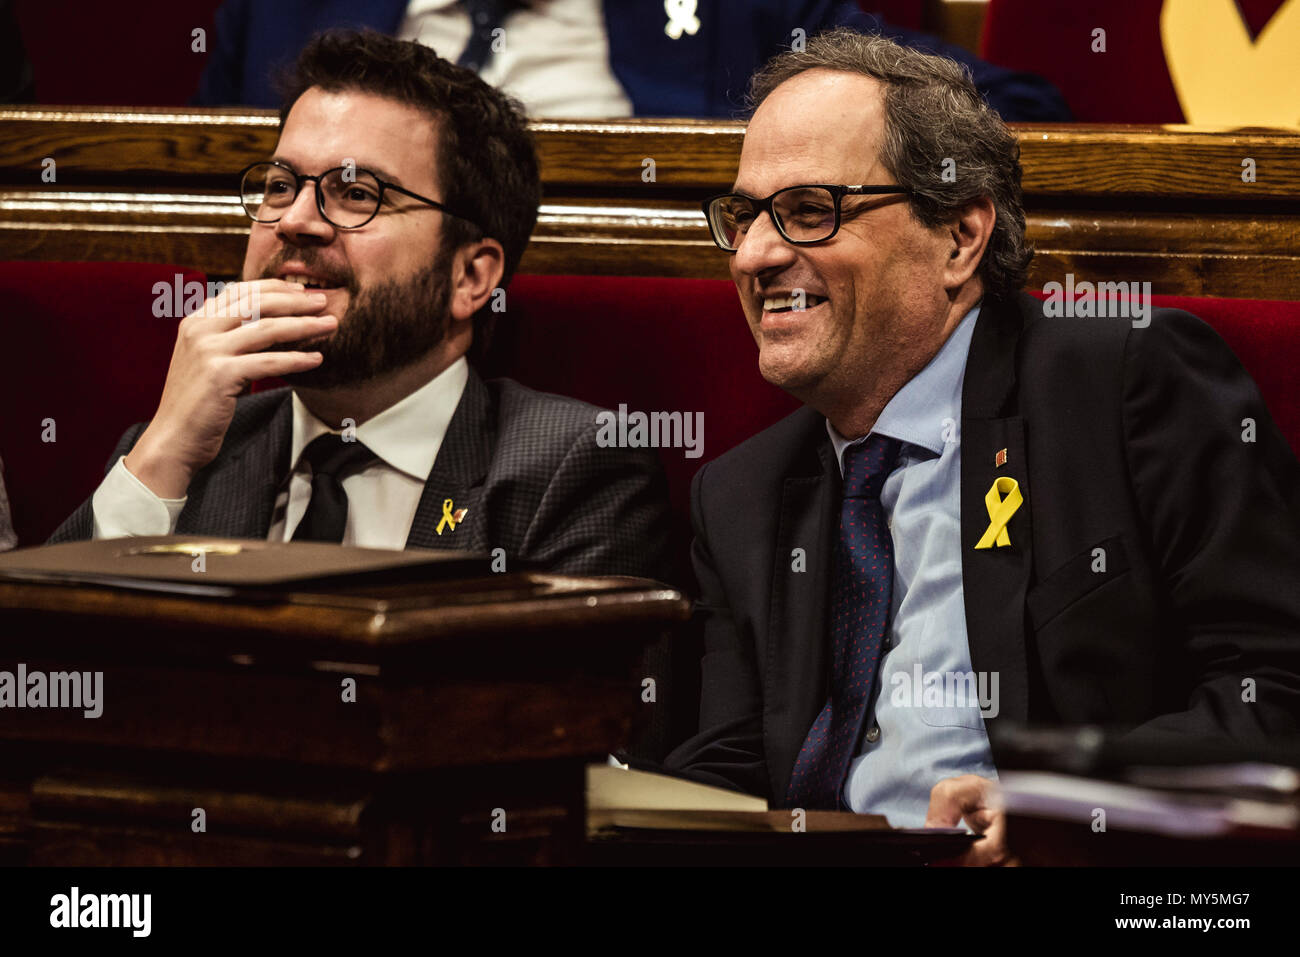 Barcelona, Spain. 6 June, 2018:  PERE ARAGONES, Vice-President and Minister of Economics, and QUIM TORRA, President of the Catalan Government, llaugh during a session at the Catalan Parliament Credit: Matthias Oesterle/Alamy Live News Stock Photo